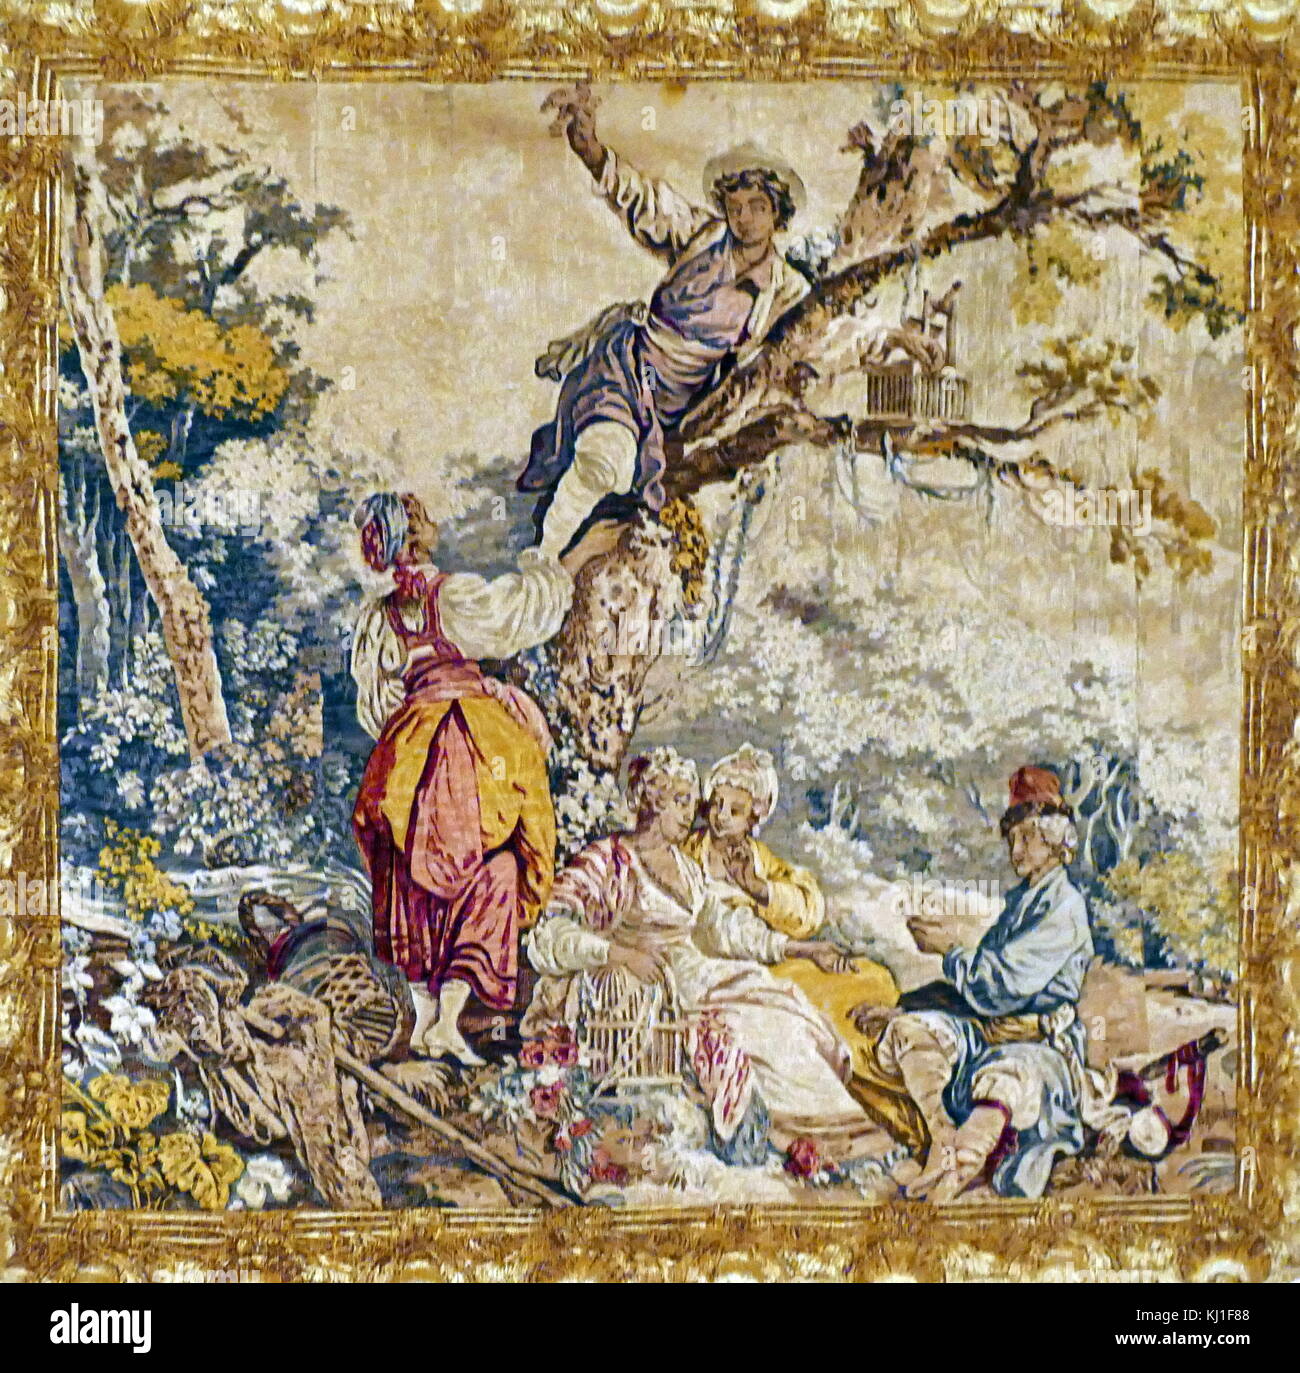 18th century tapestry, from the Hermitage Museum, St Petersburg, Russia. Depicts a country scene Stock Photo